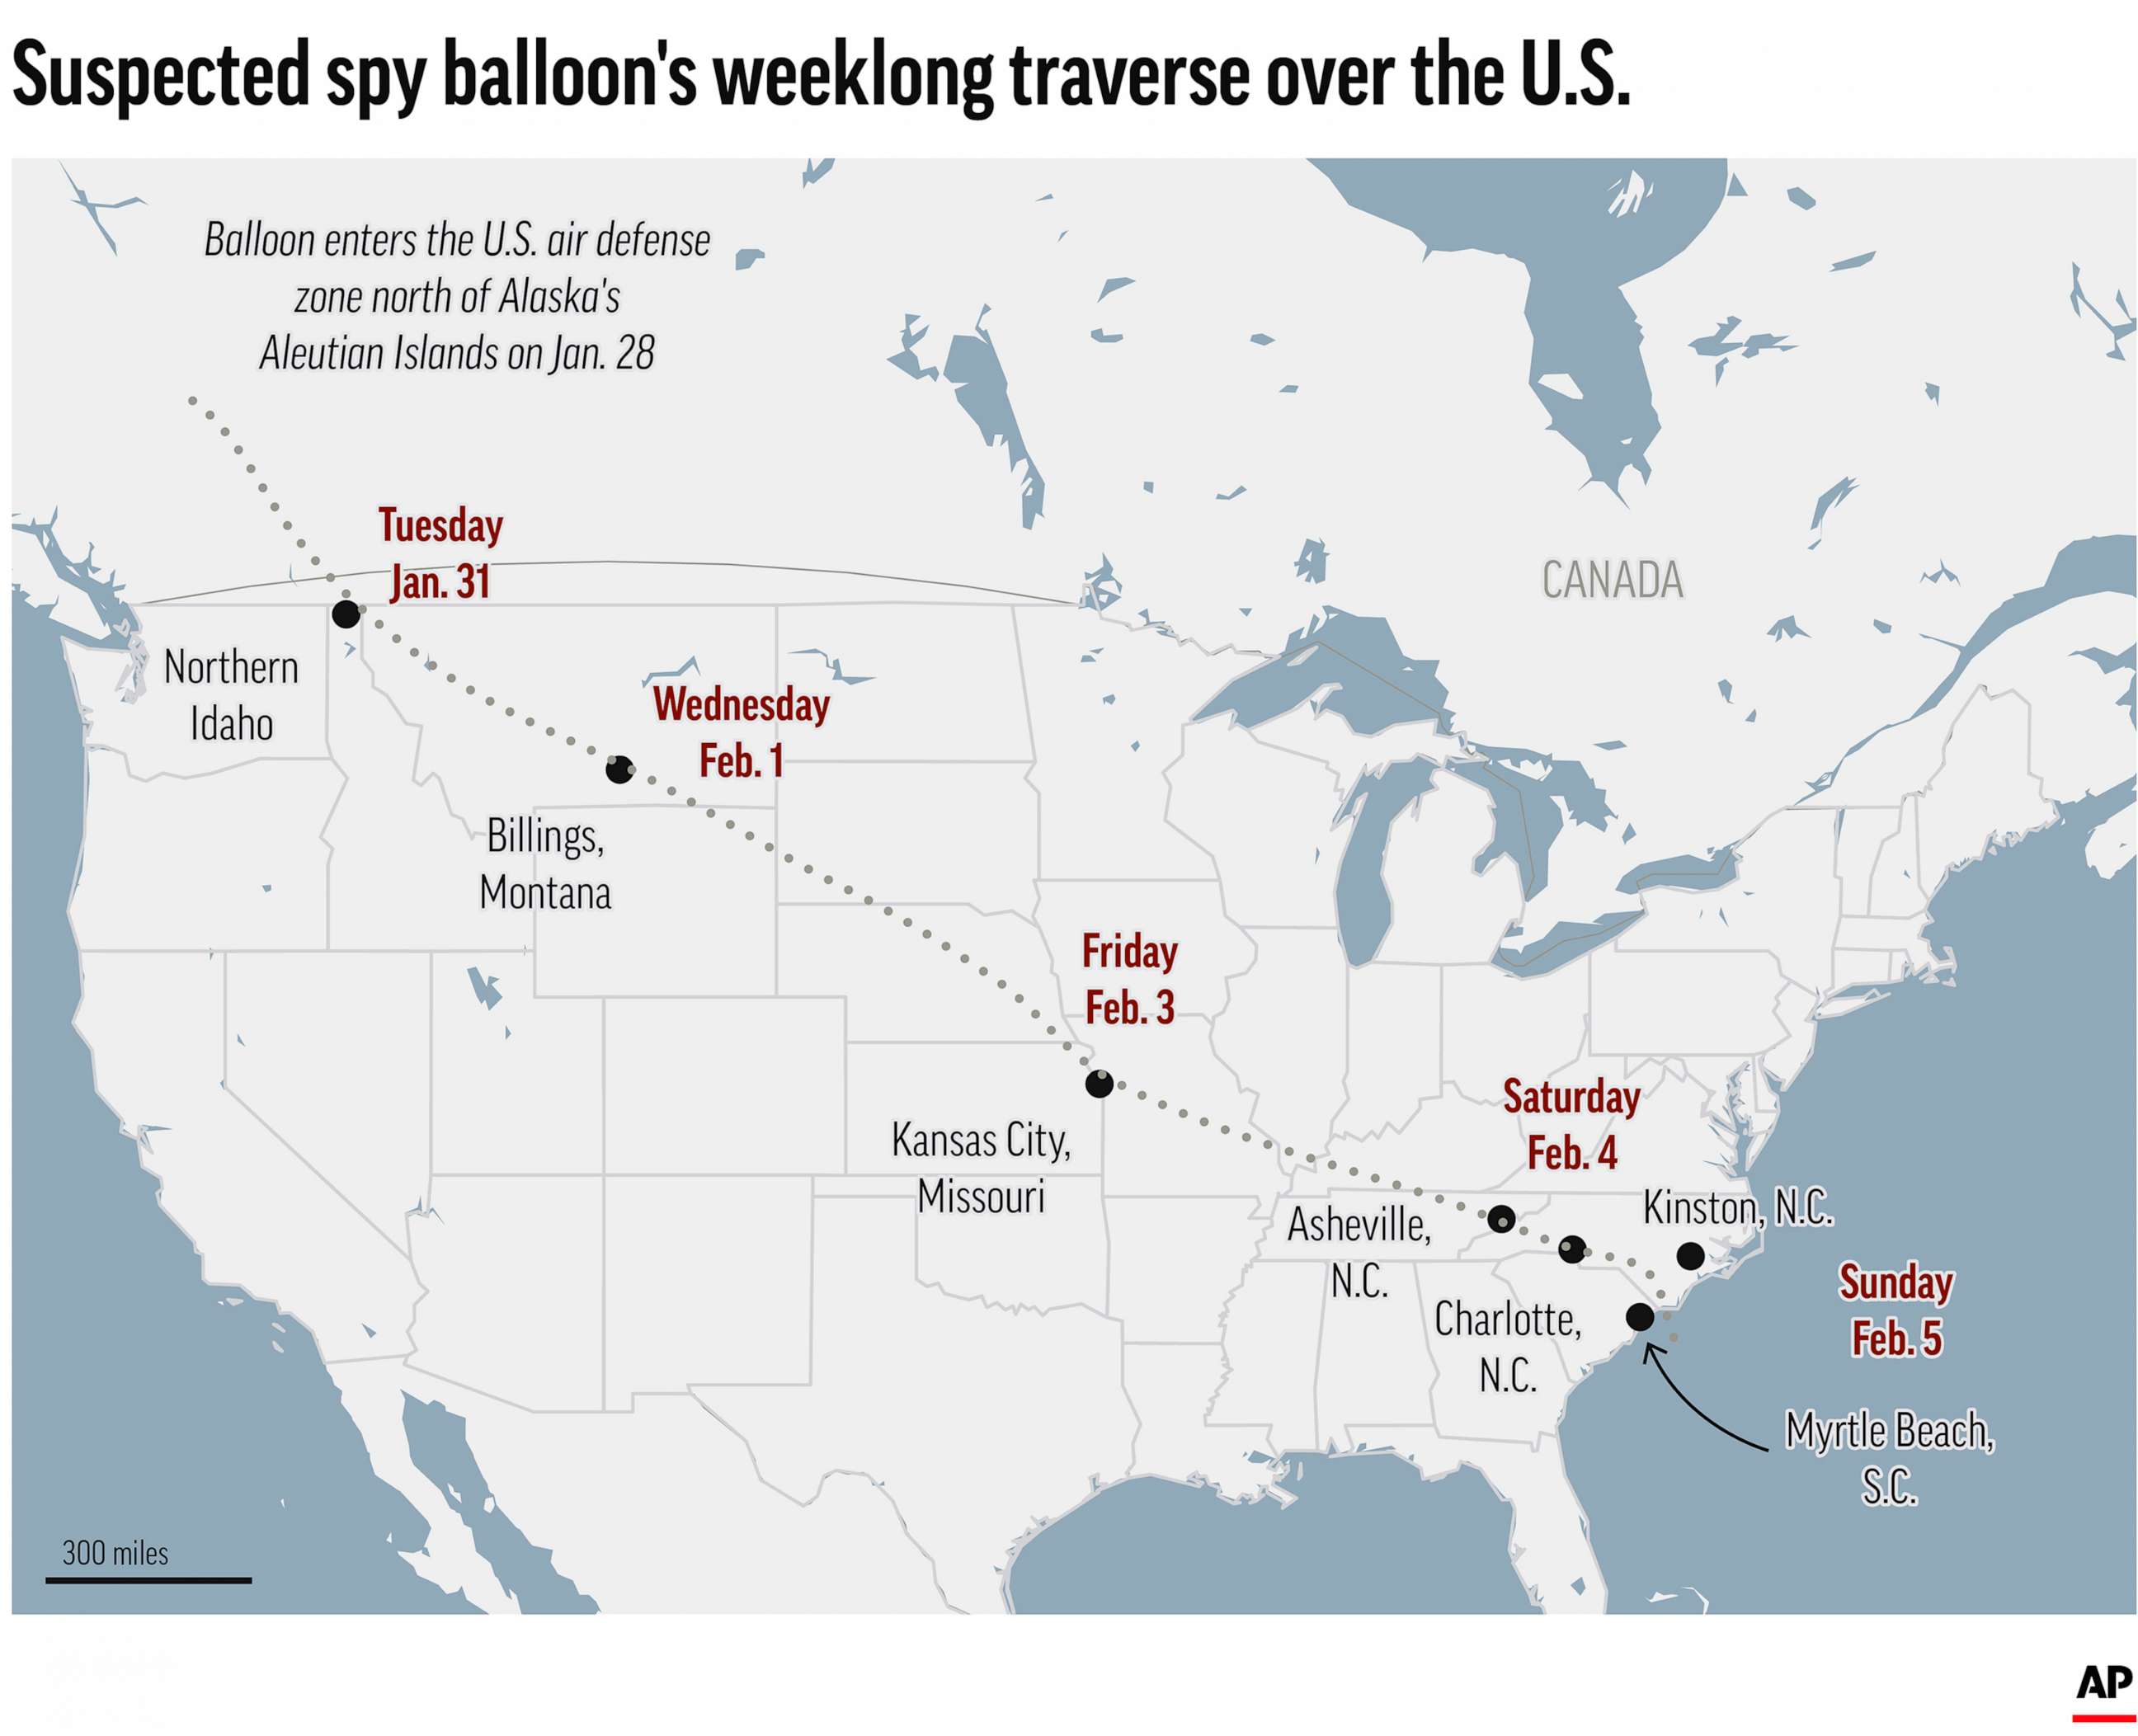 PHOTO: Map shows the path of suspected Chinese spy balloon across the U.S. at the beginning of 2023.